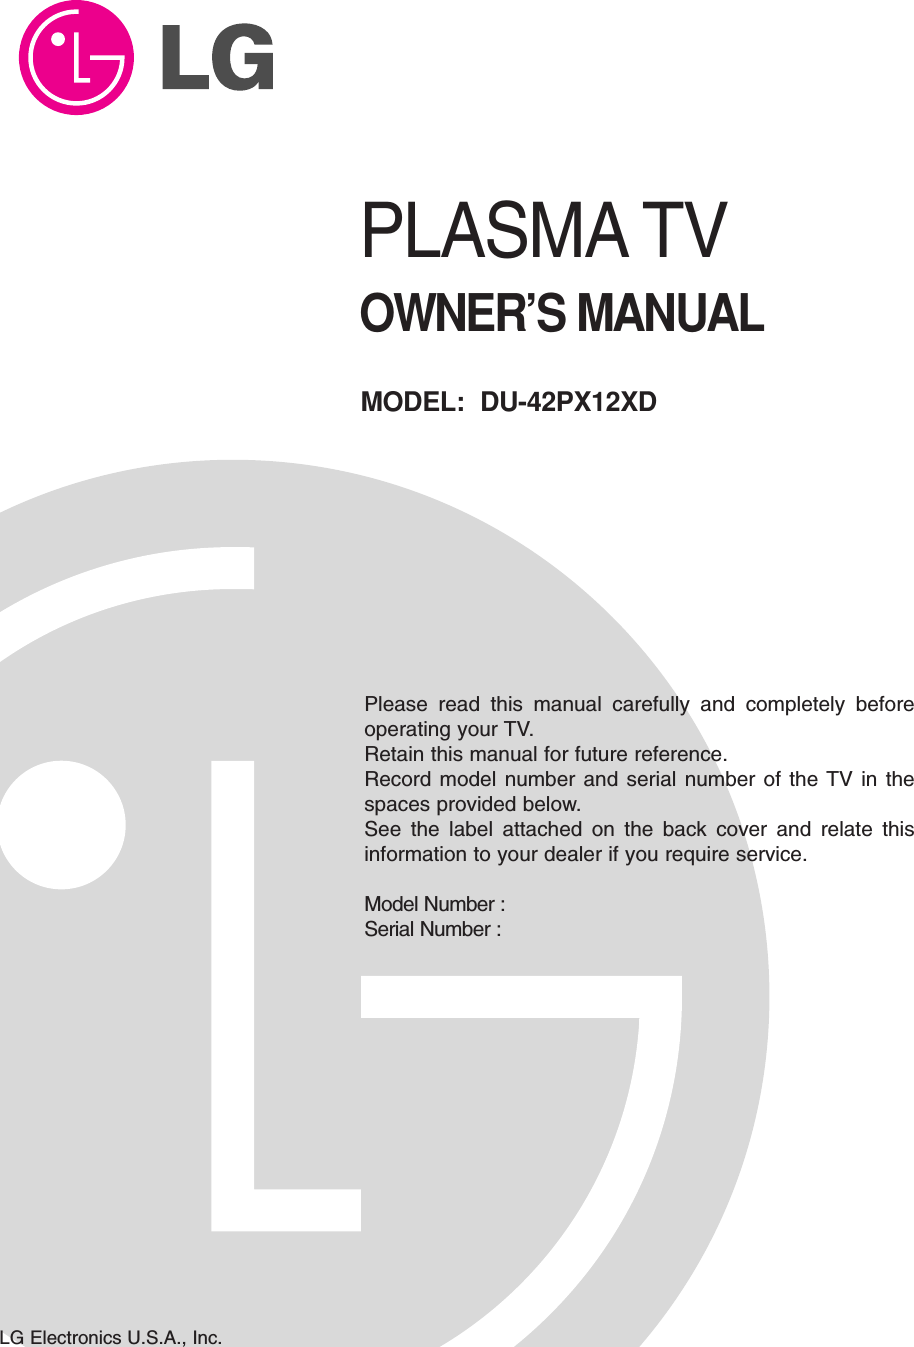 PLASMA TVOWNER’S MANUALPlease read this manual carefully and completely beforeoperating your TV. Retain this manual for future reference.Record model number and serial number of the TV in thespaces provided below. See the label attached on the back cover and relate thisinformation to your dealer if you require service.Model Number : Serial Number : MODEL:  DU-42PX12XDLG Electronics U.S.A., Inc.